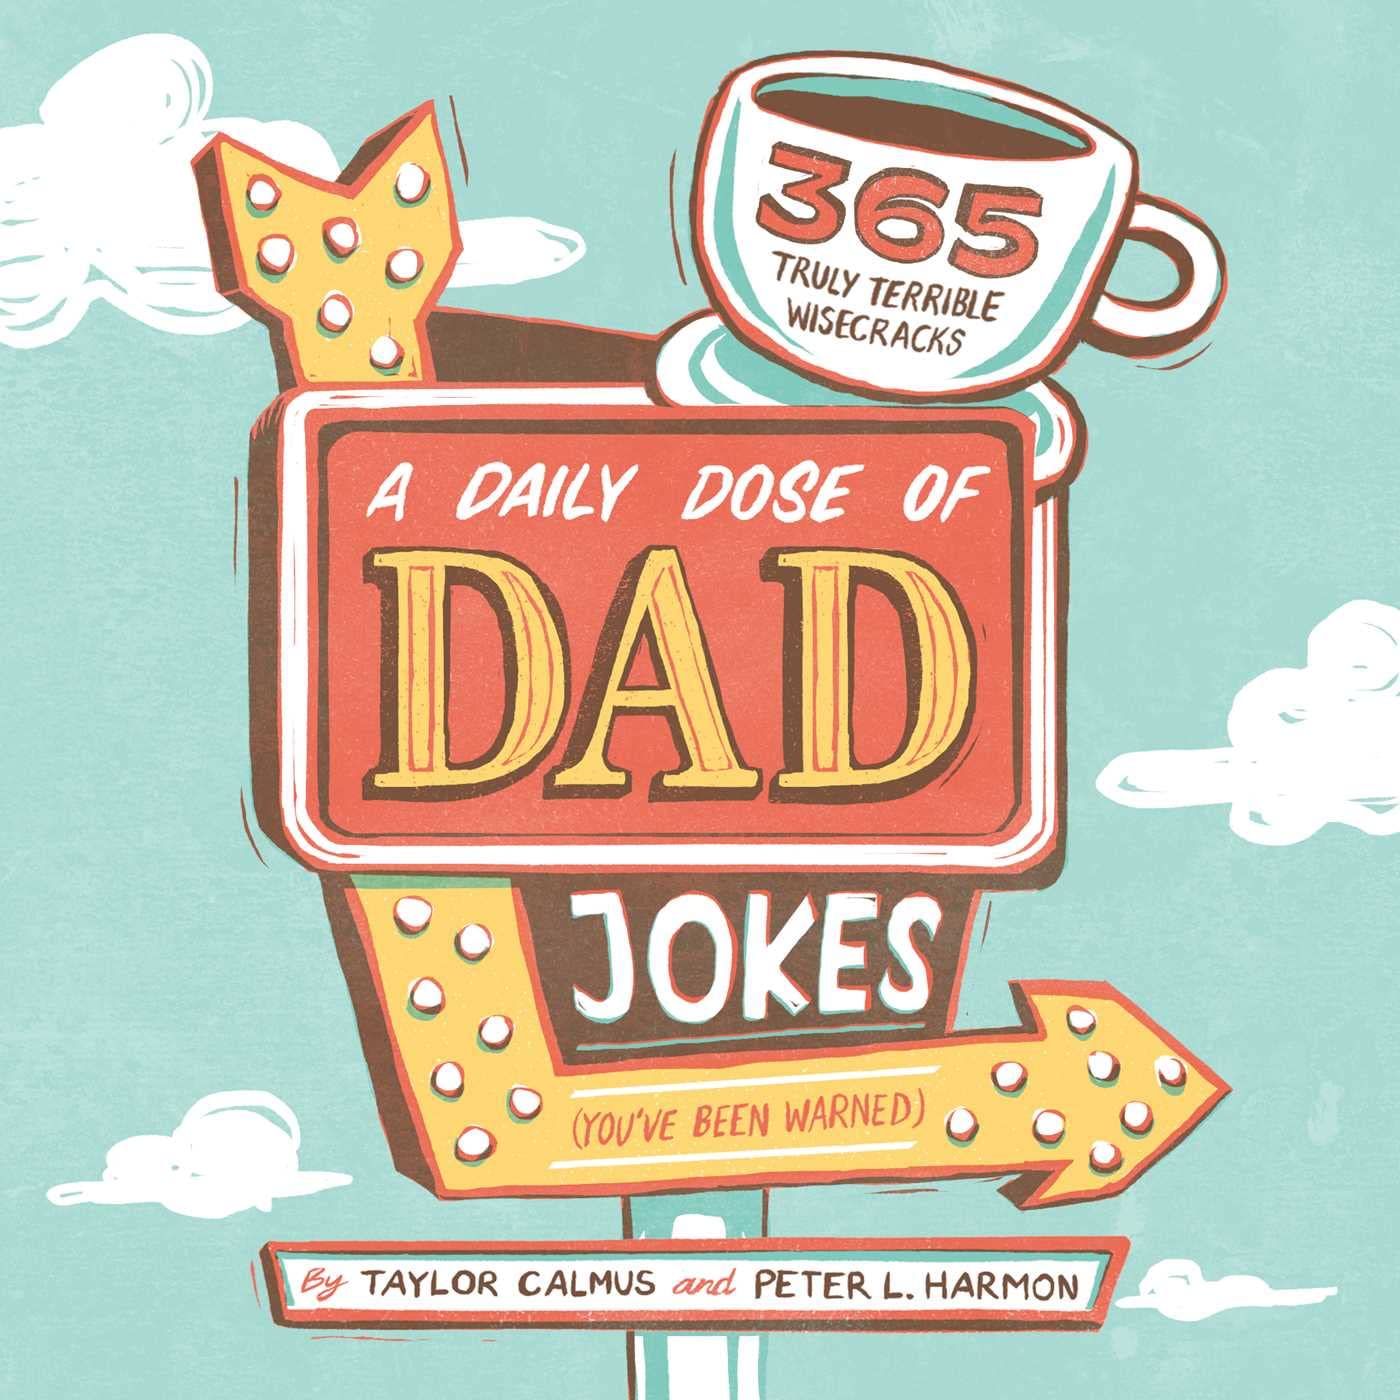 A Daily Dose of Dad Jokes: 365 Truly Terrible Wisecracks (You've Been Warned) by Calmus, Taylor